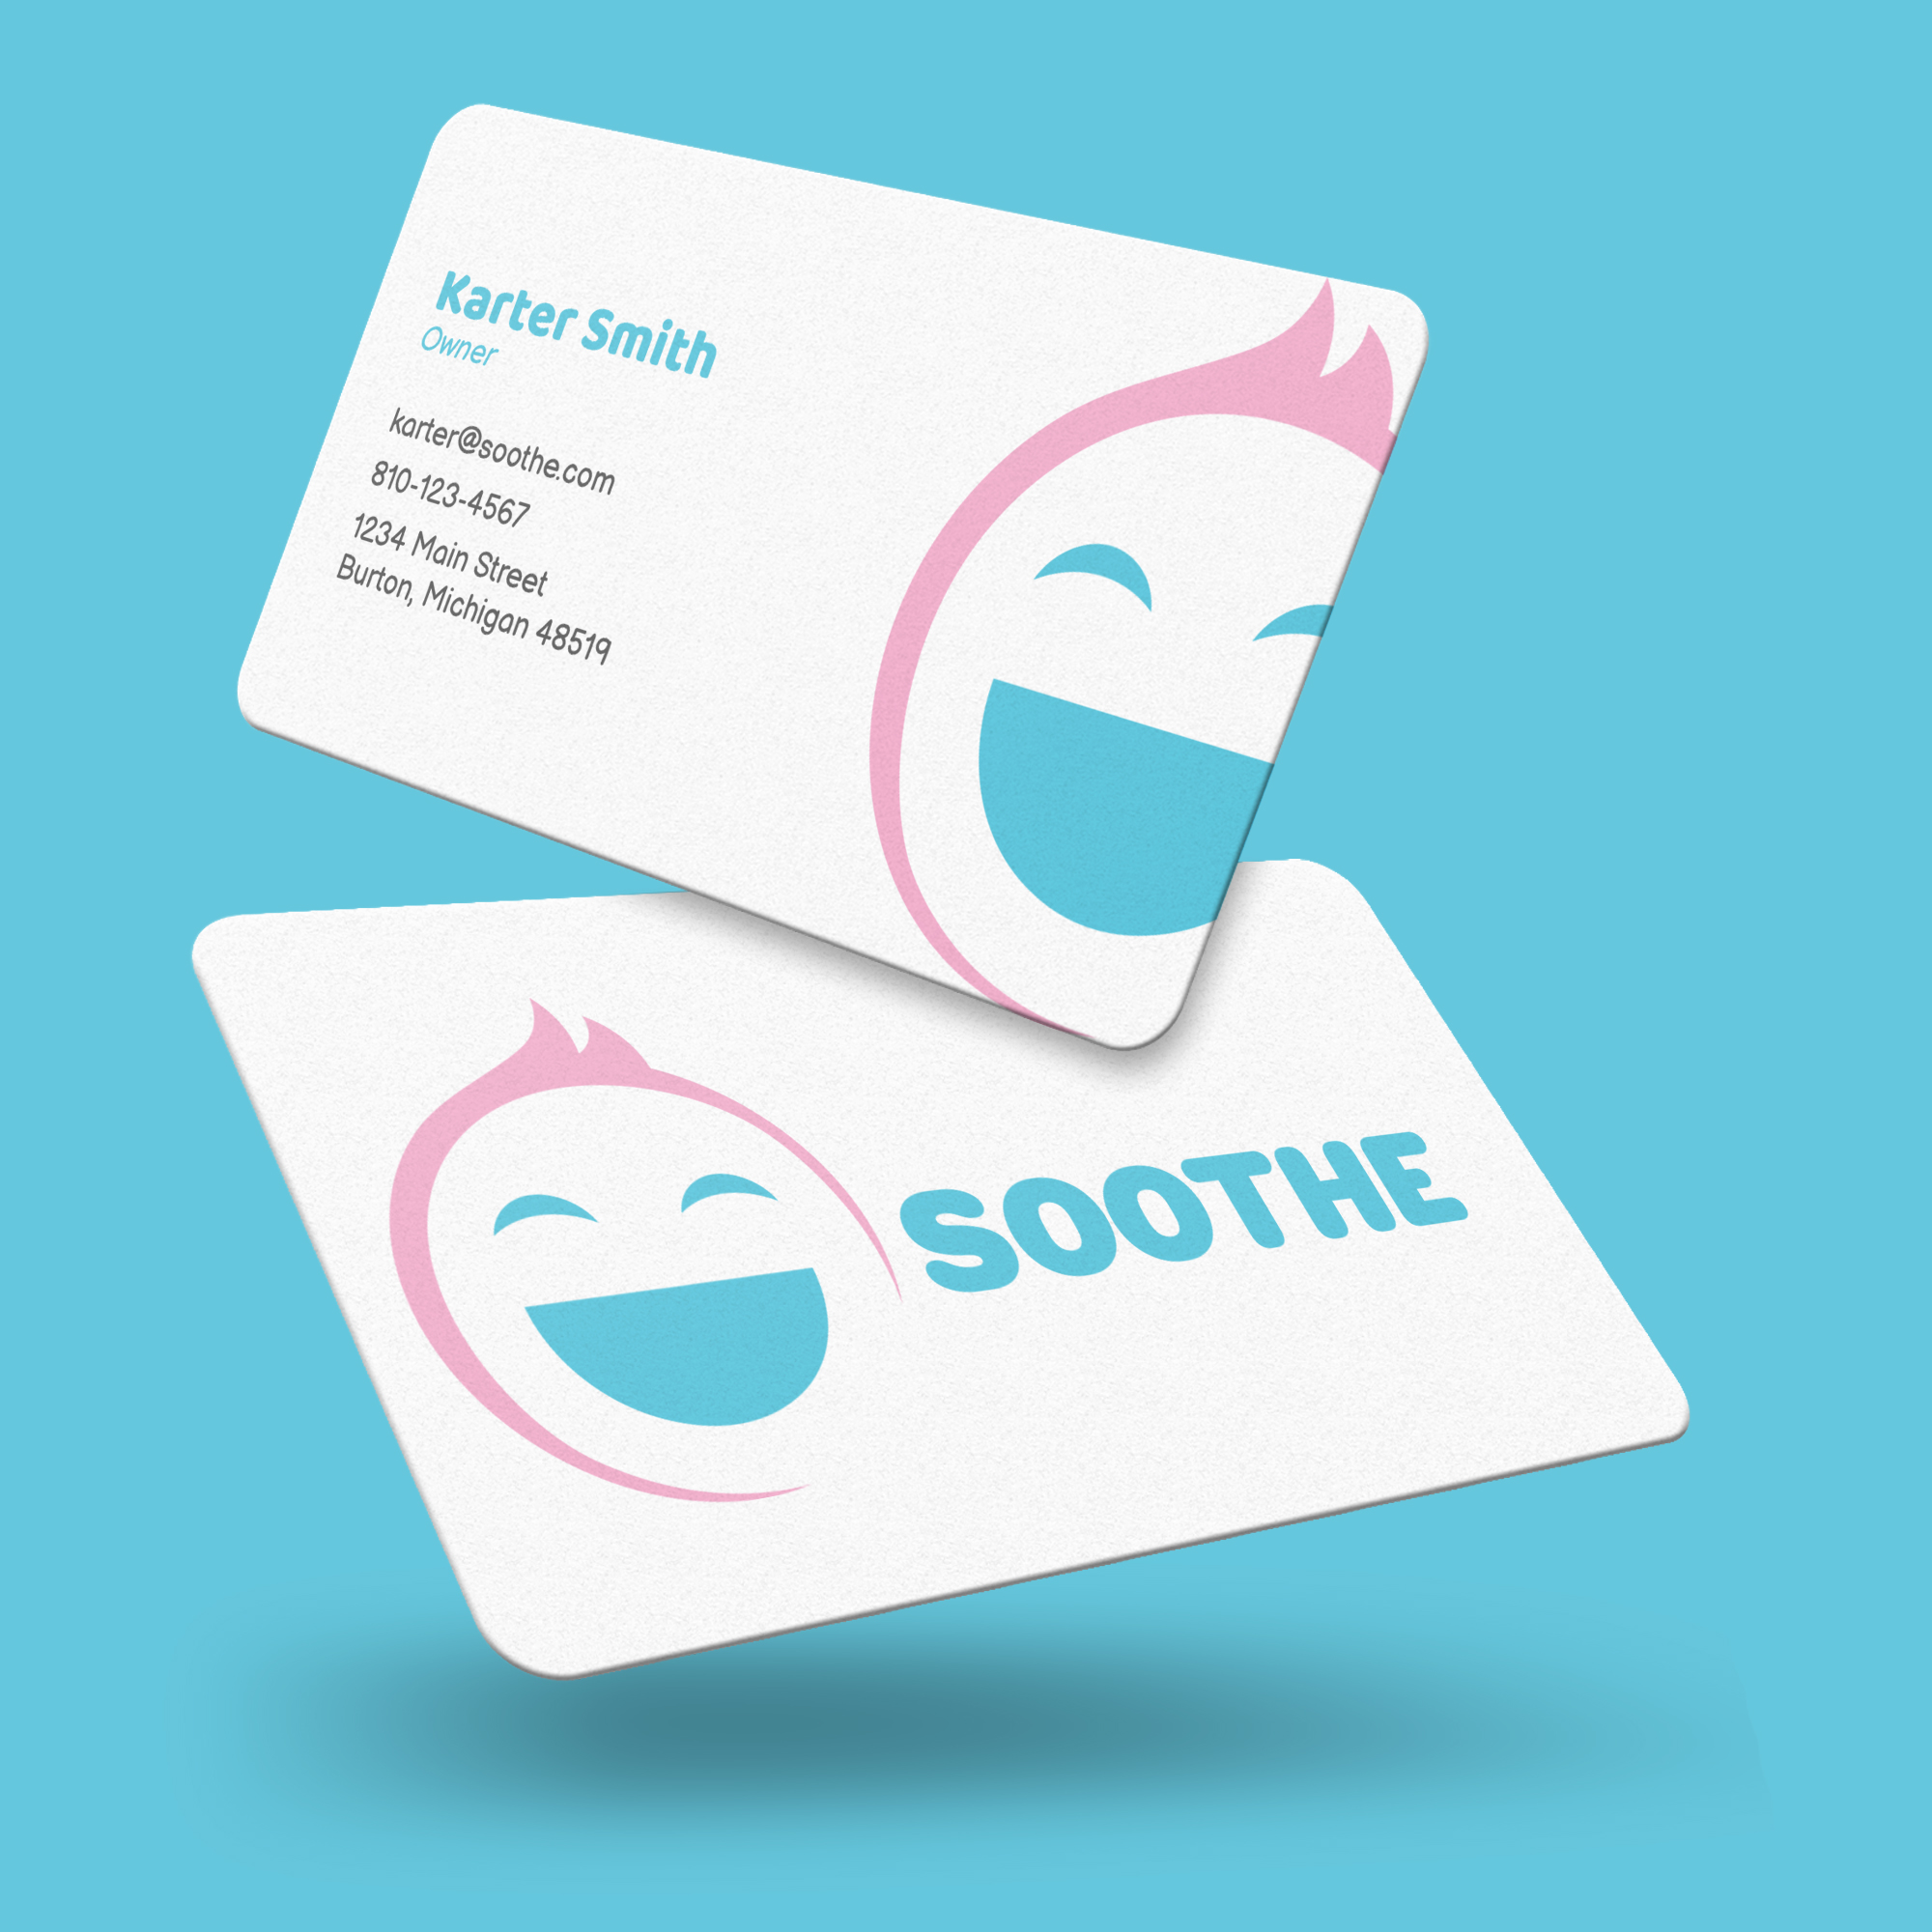 Soothe_Business_Cards_Mockup_Web